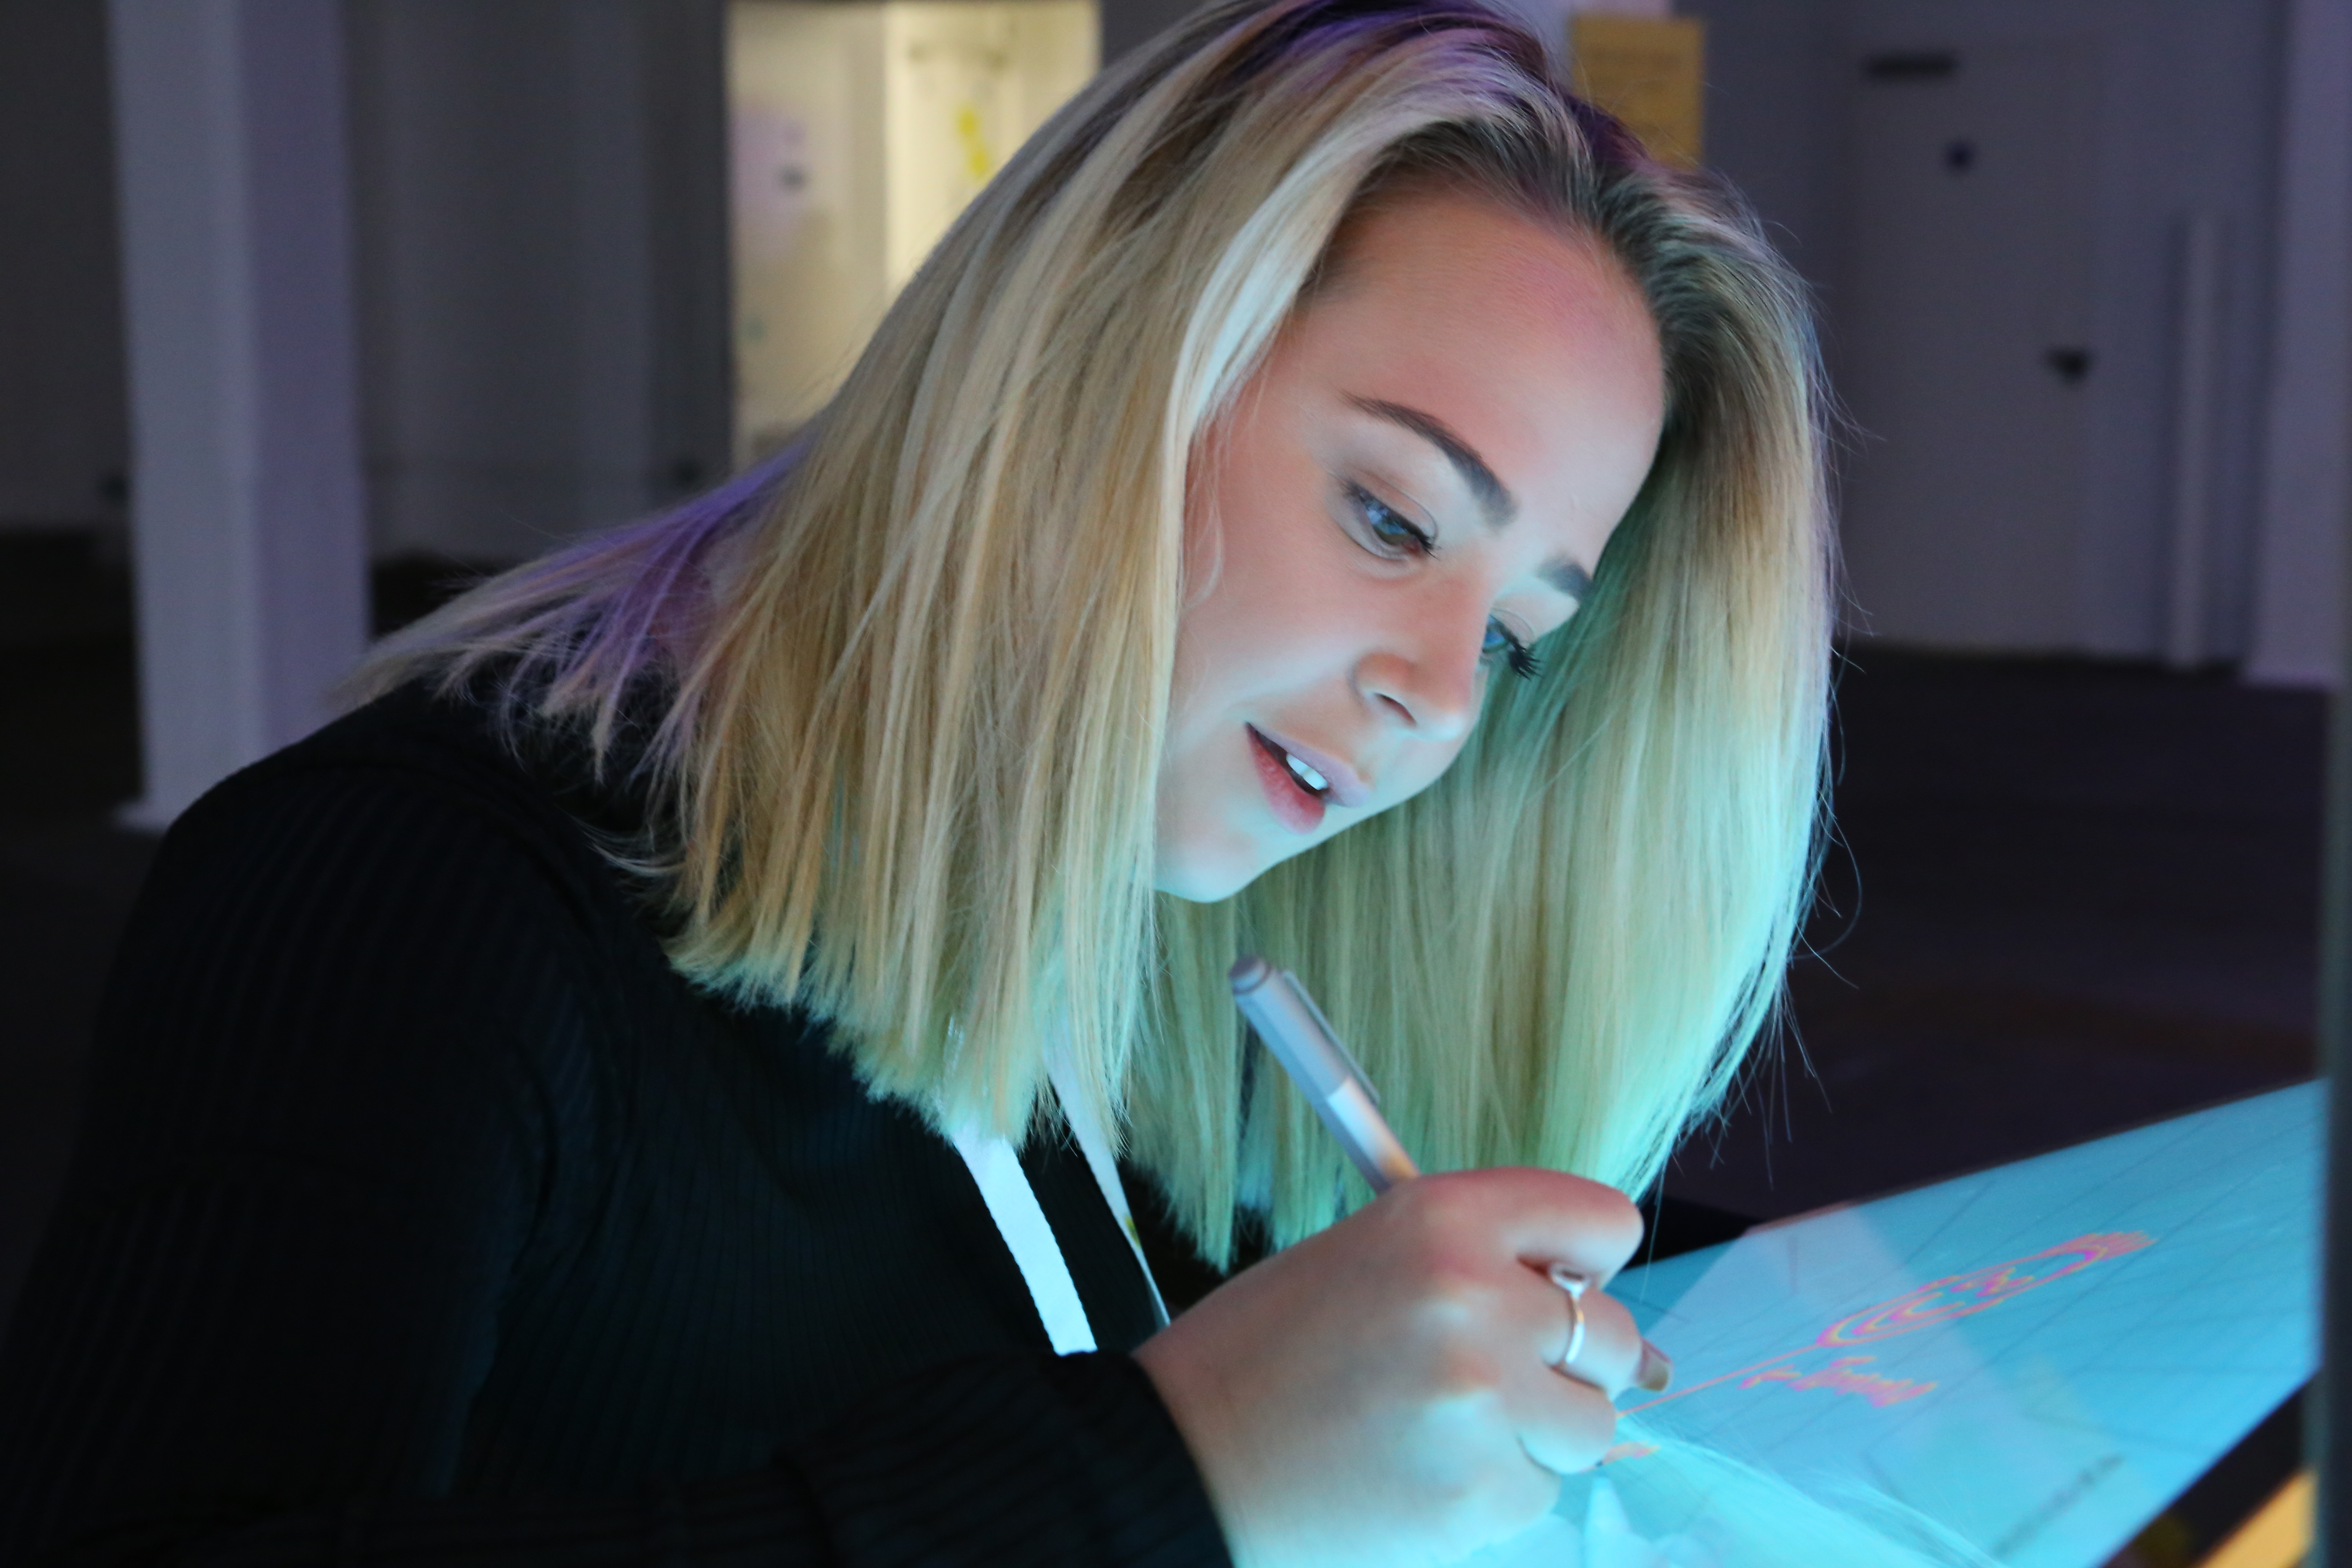 Girl draws on Surface Studio at D@AD event in London